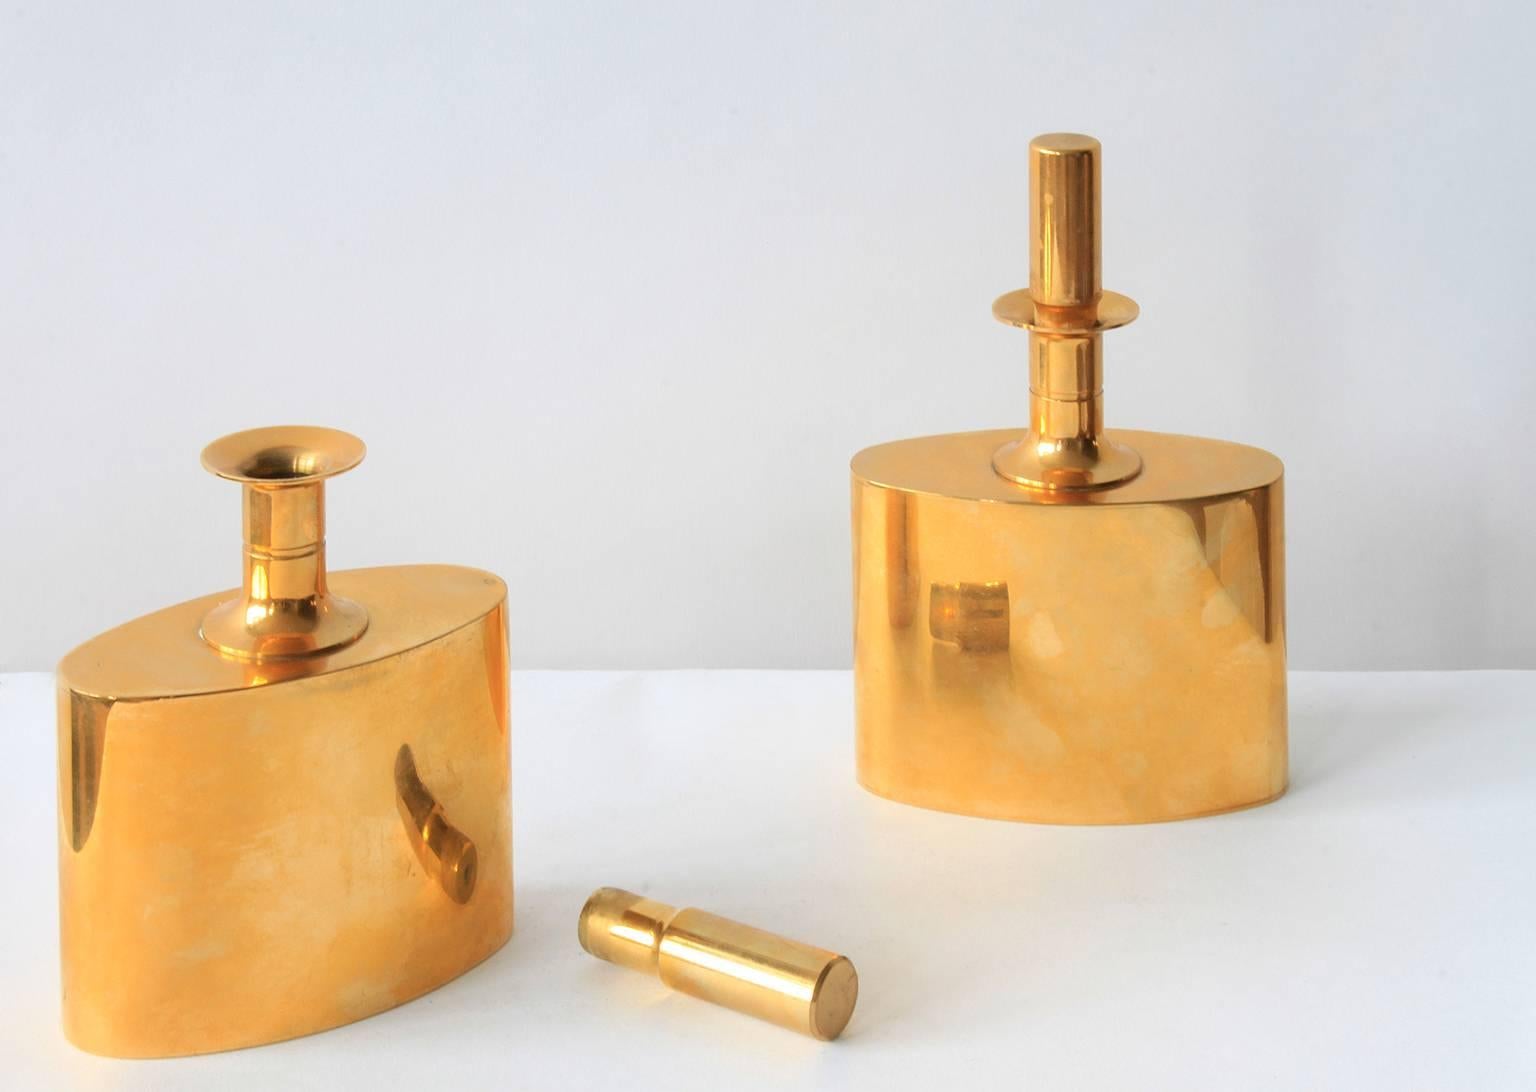 A pair of gold lacquered brass schnapps flasks by Pierre Forsell for Skultuna.